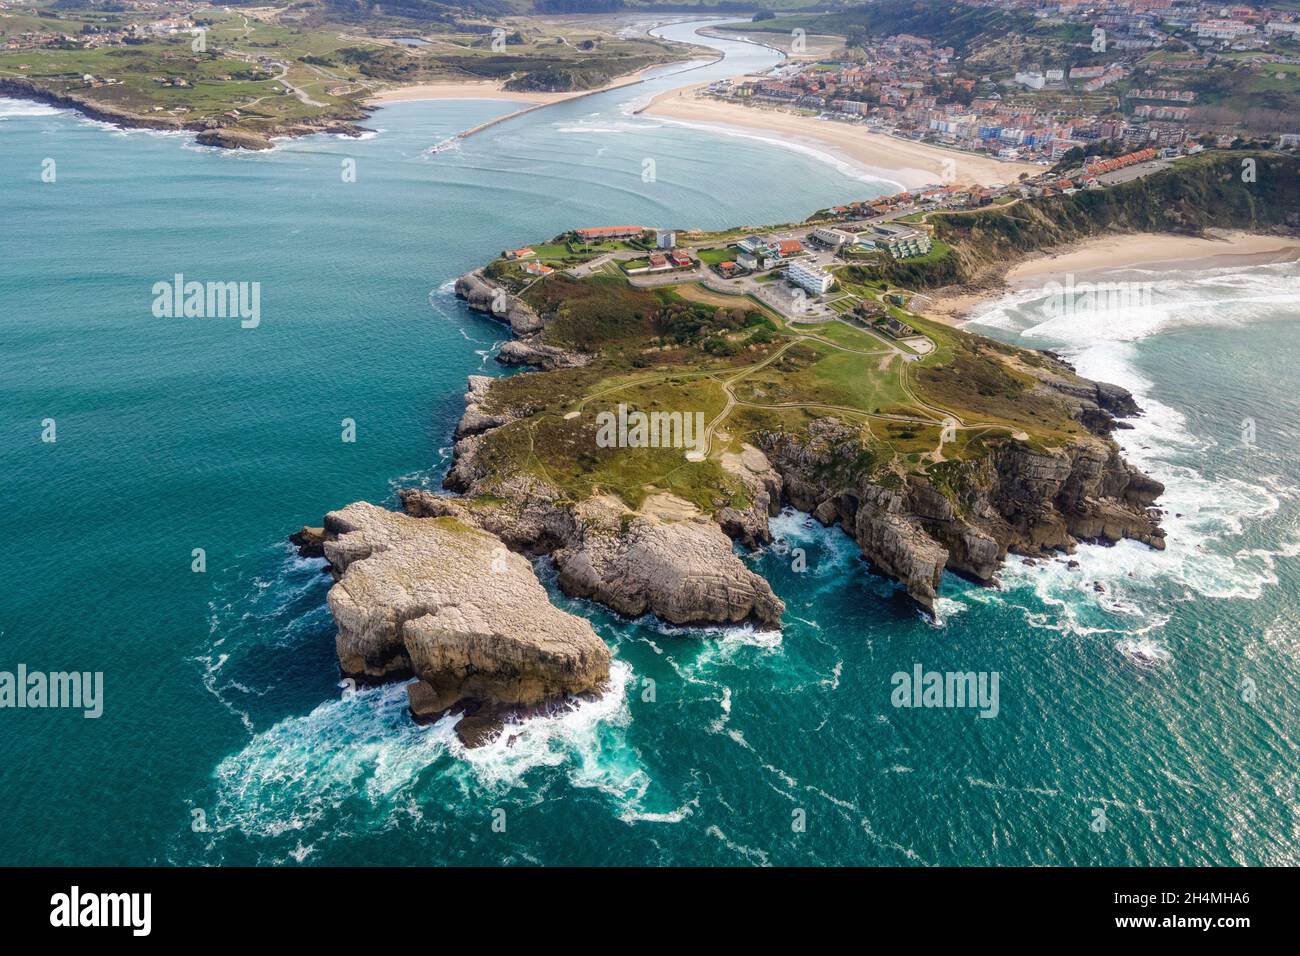 Aerial view of a scenic coastline landscape in Suances, Cantabria, Spain. High quality photo. Stock Photo